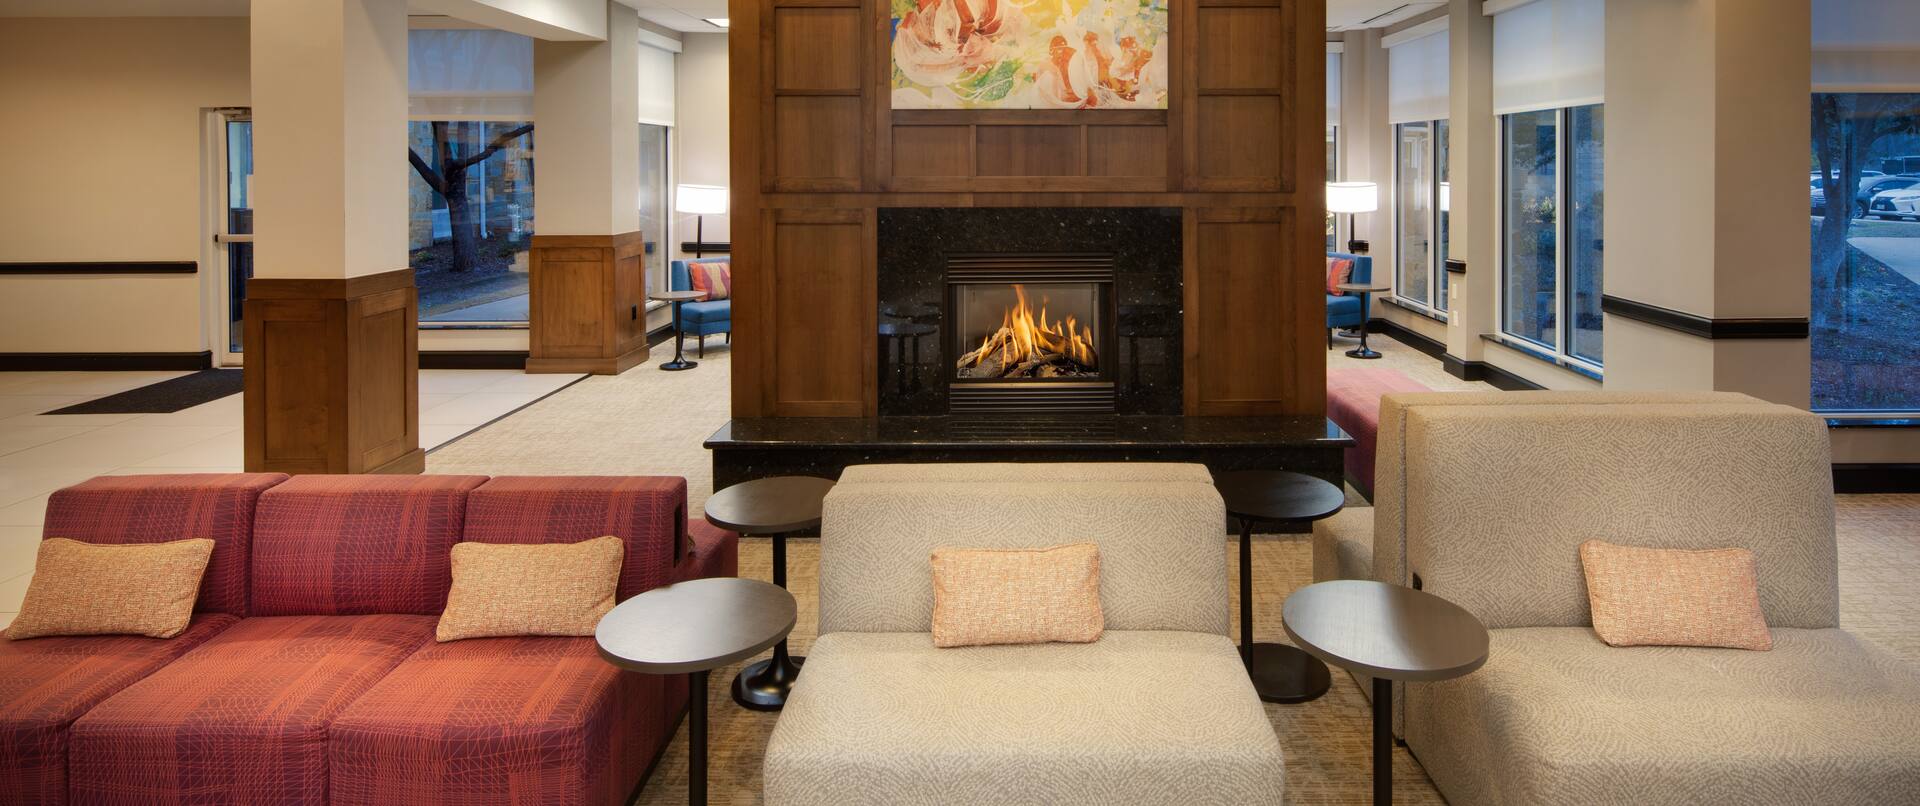 Lobby With Fireplace